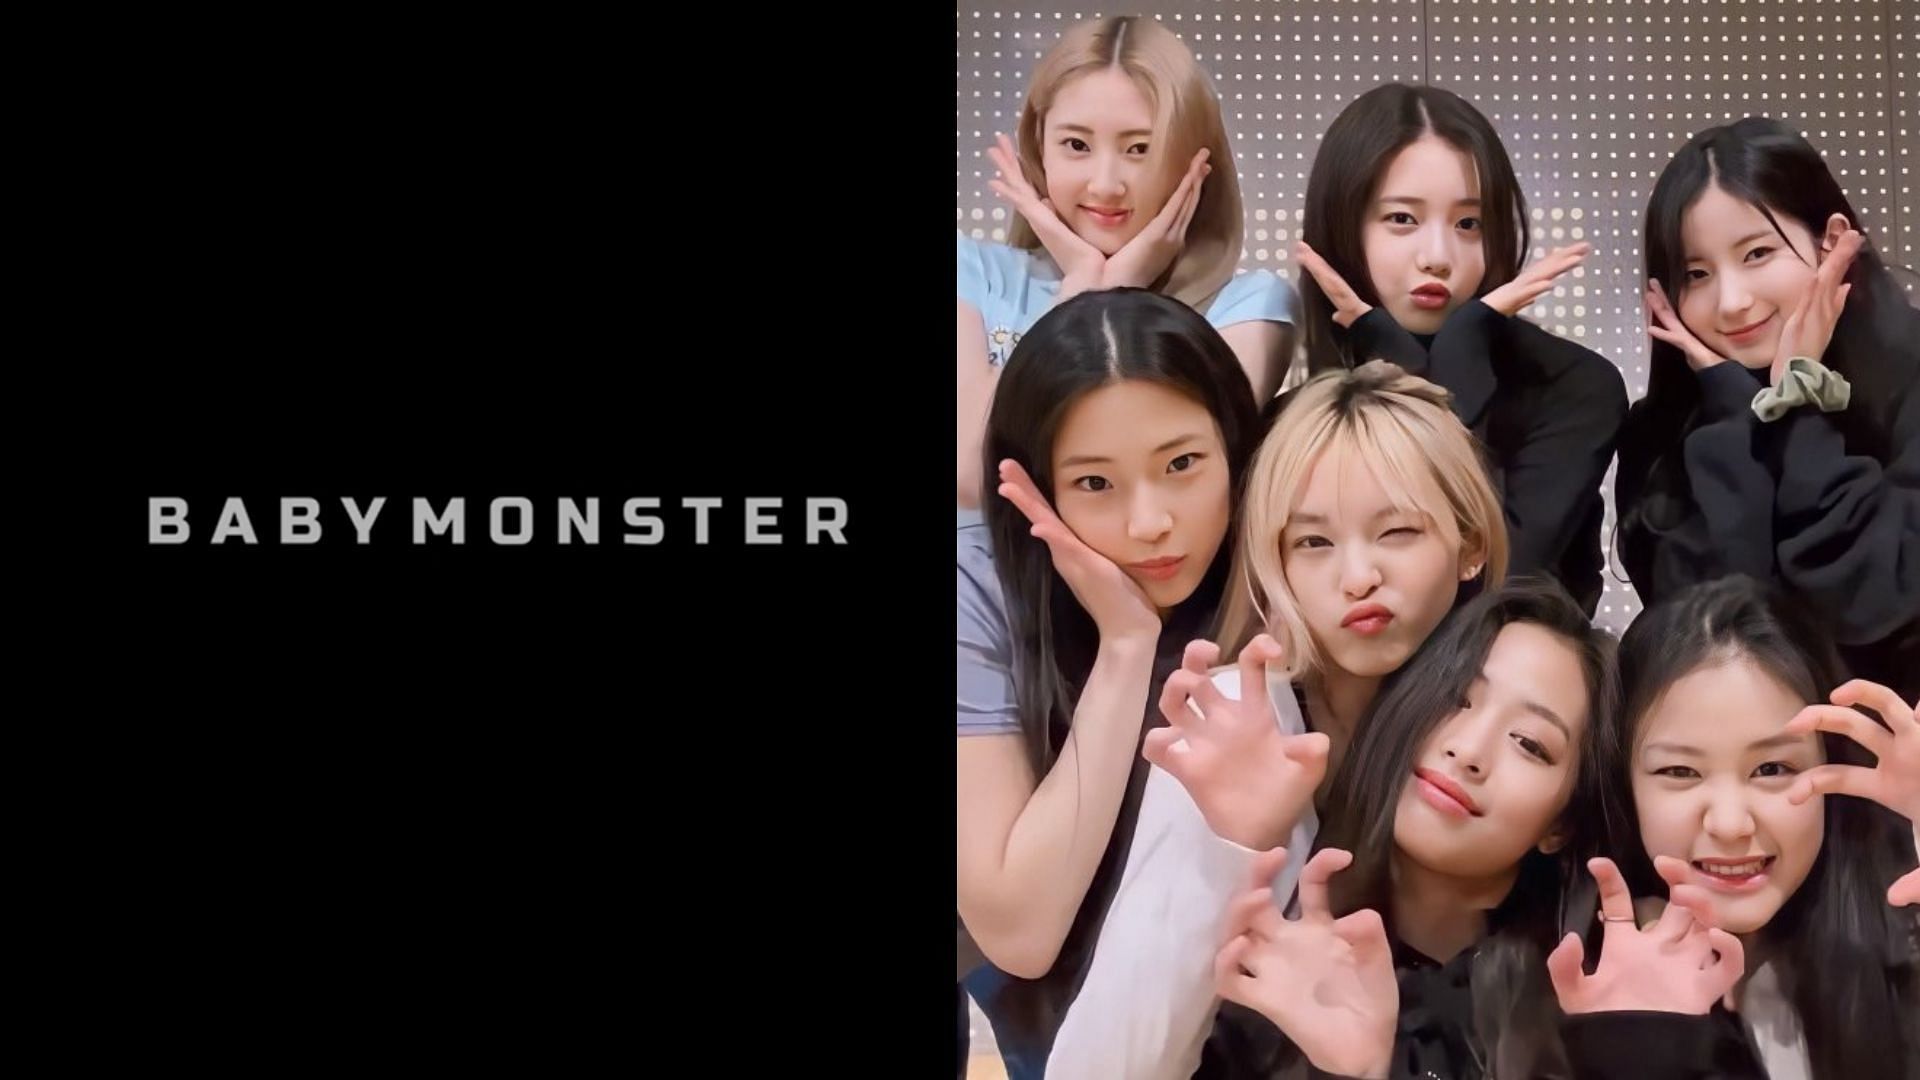 BABYMONSTER debuts with all seven pre-debut members (Images via YouTube/BABYMONSTER and Twitter/picbaemon